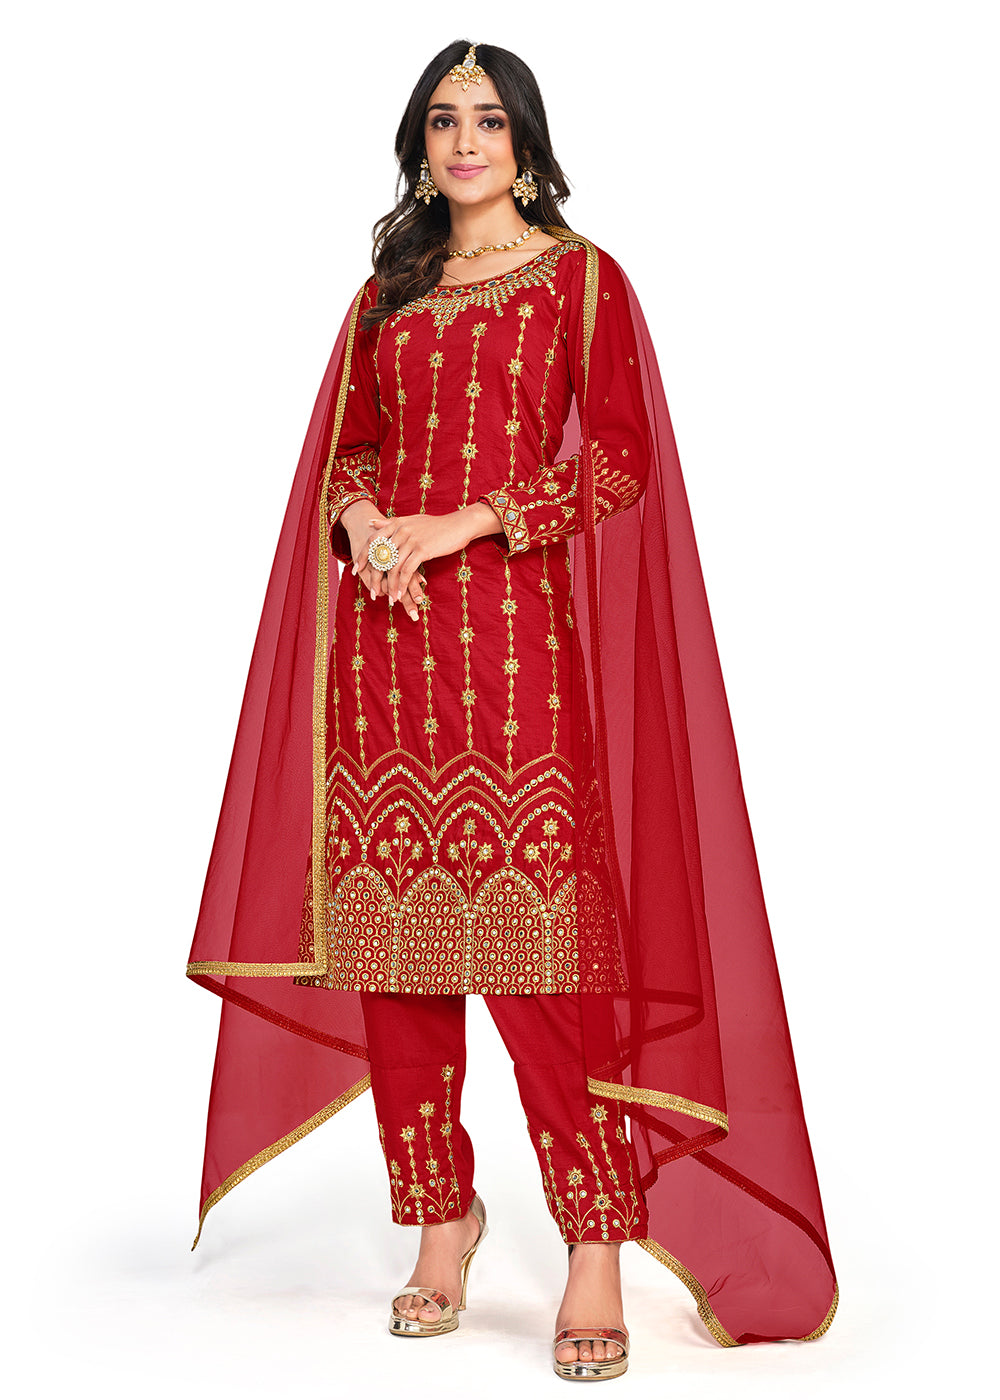 Buy Now Beautiful Mirror Work Red Silk Festive Salwar Suit Online in USA, UK, Canada & Worldwide at Empress Clothing.